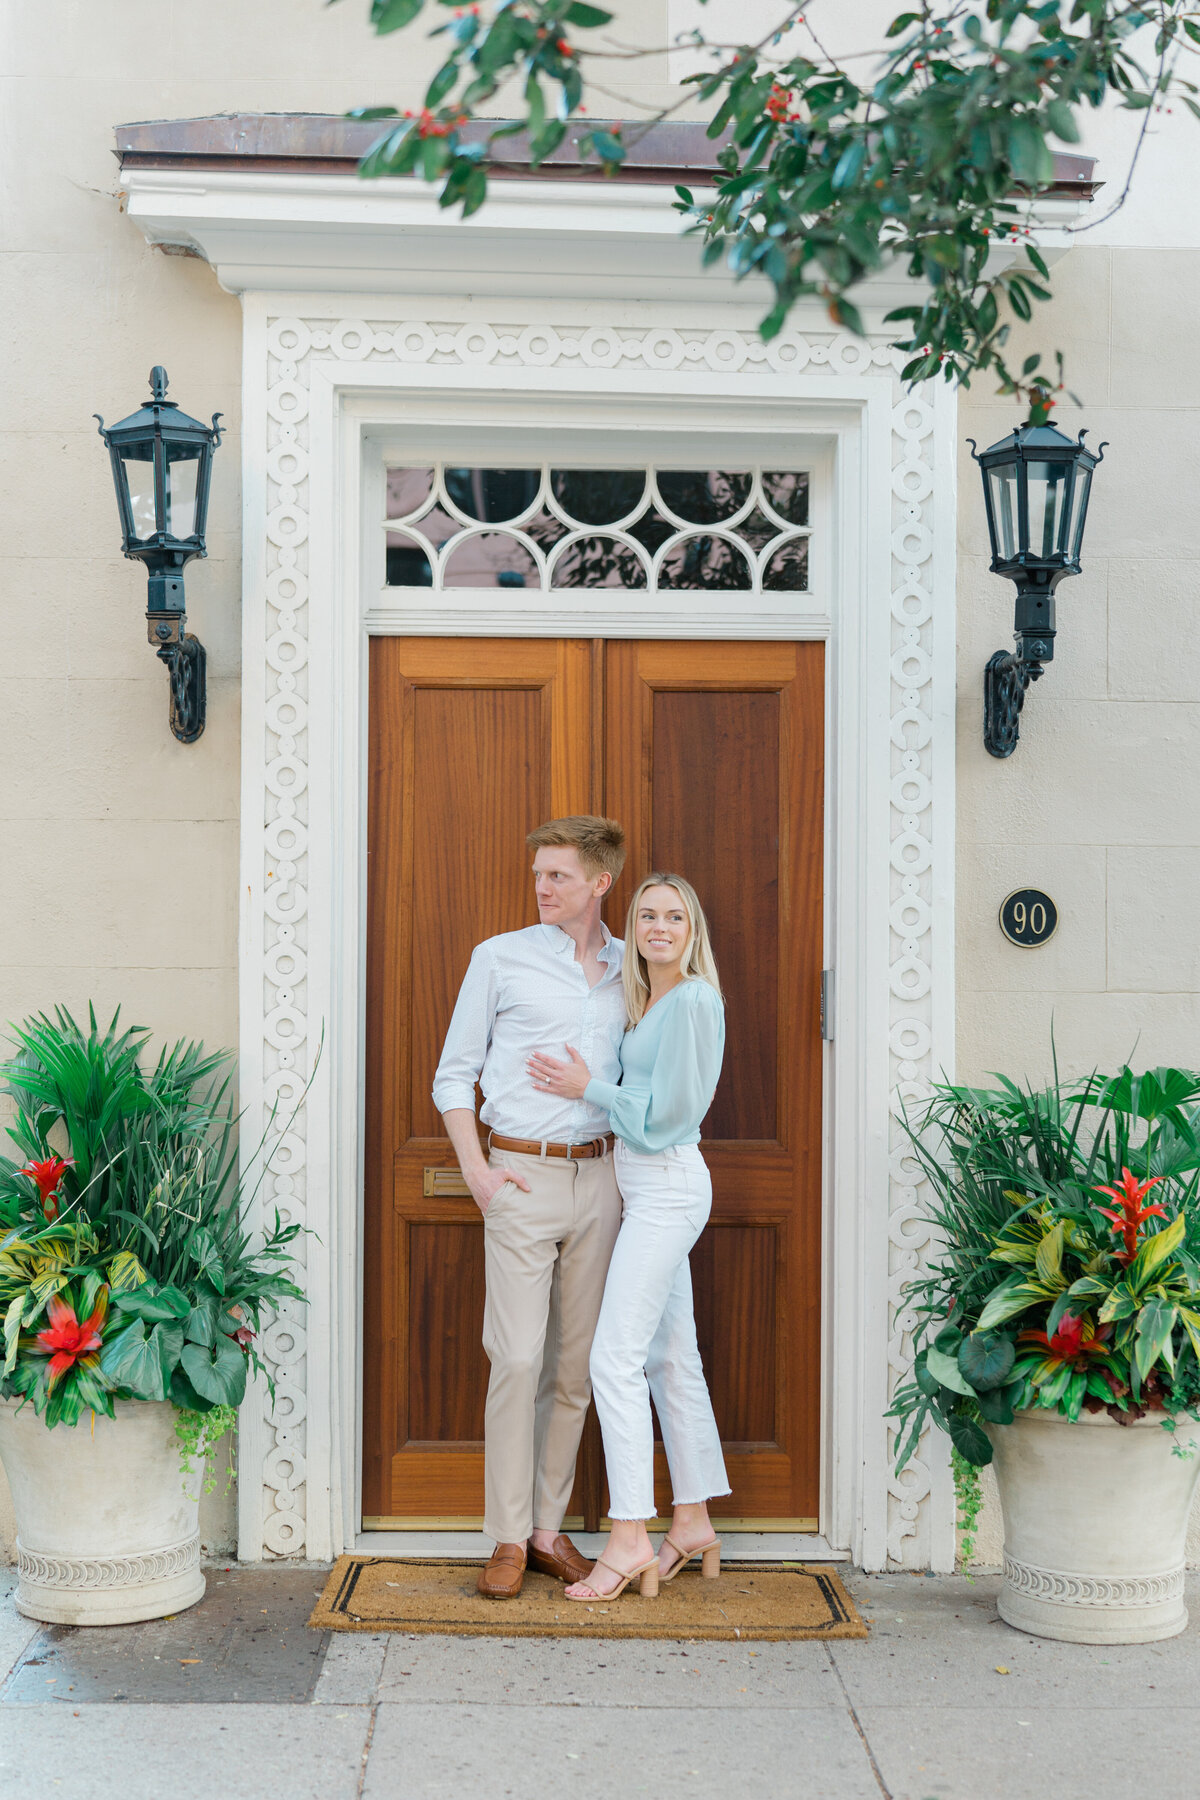 Charleston engagement session with a tropical feel.  Destination engagement photos in downtown Charleston. Gas lantern and big wooden door with touches of green and flowers. Kailee DiMeglio Photography.